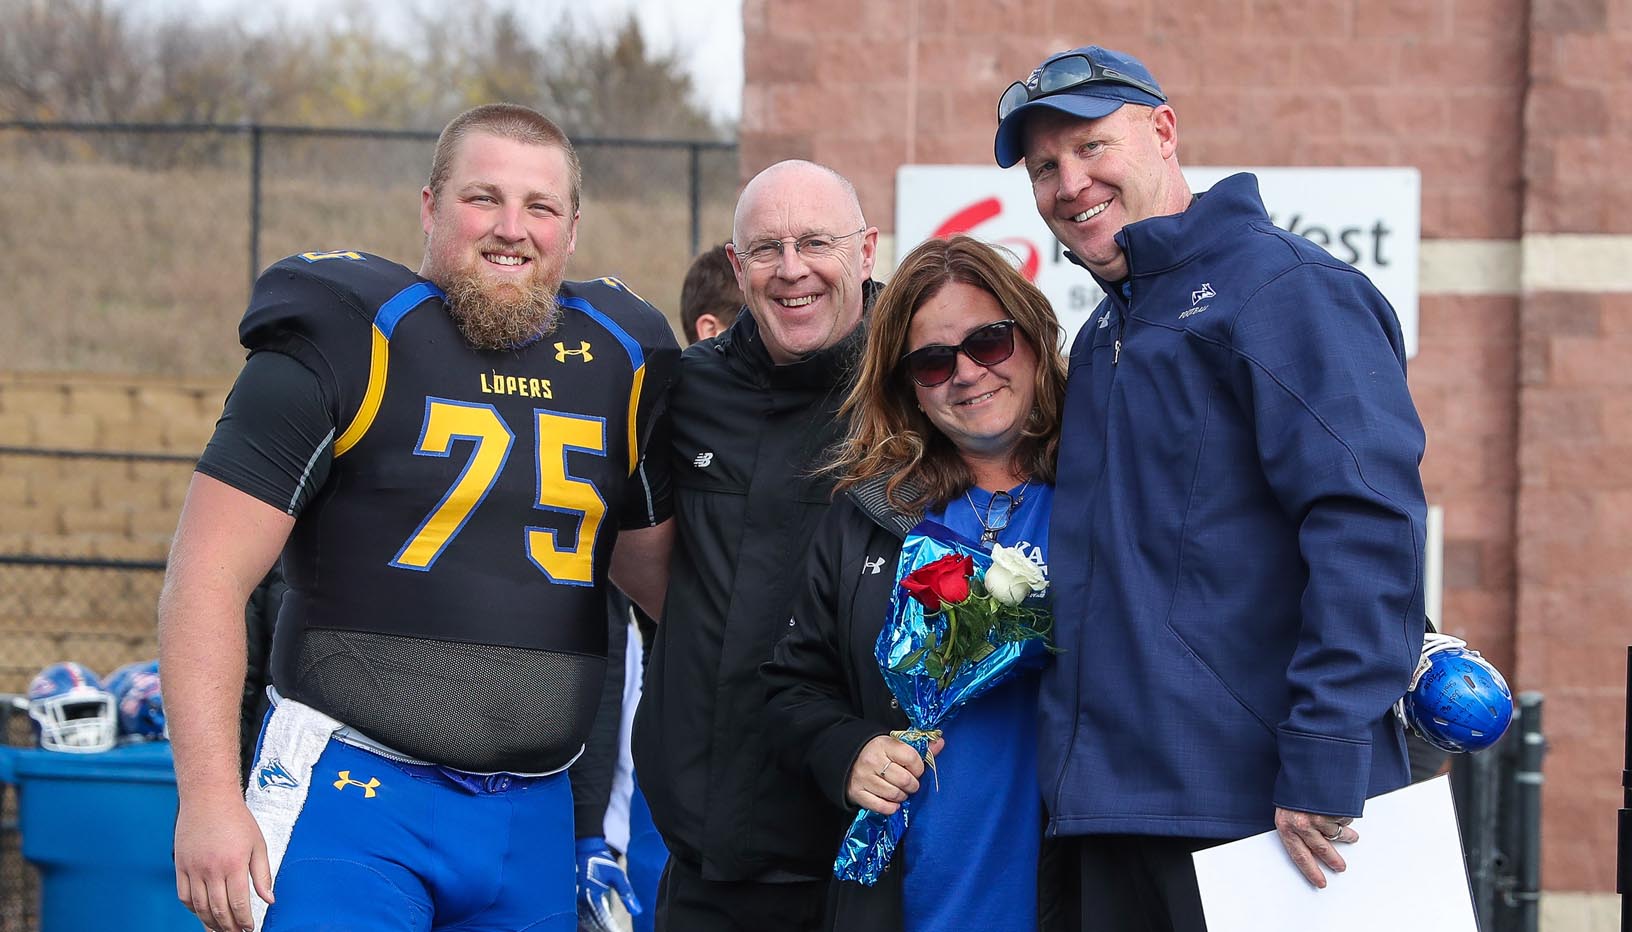 David Squiers, who finished his career last season, was a standout offensive lineman for the UNK football team. He is among four members of the Squiers family to compete as Lopers for UNK, where his dad Rick is the head volleyball coach.